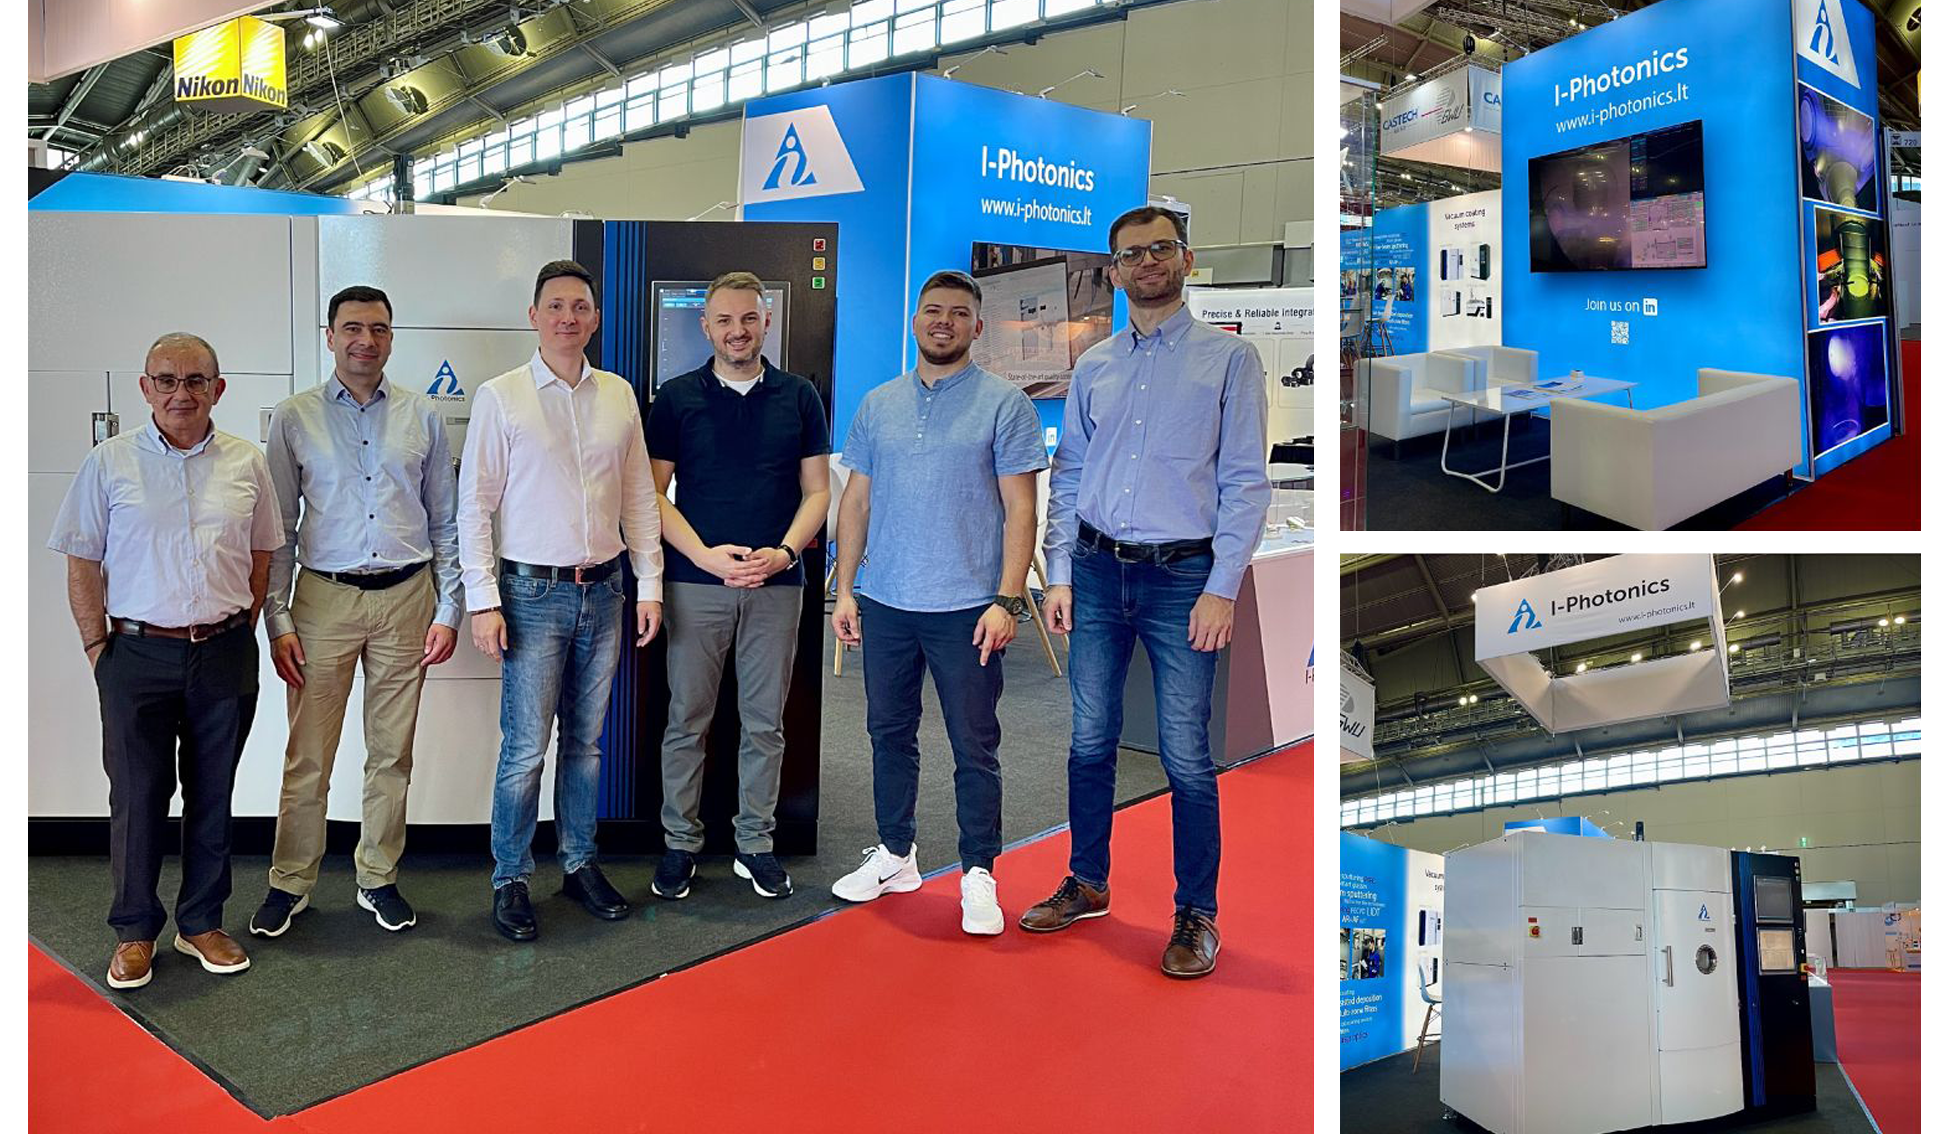 Our I-Photonics team is looking forward to meet you at the Optatec Messe!